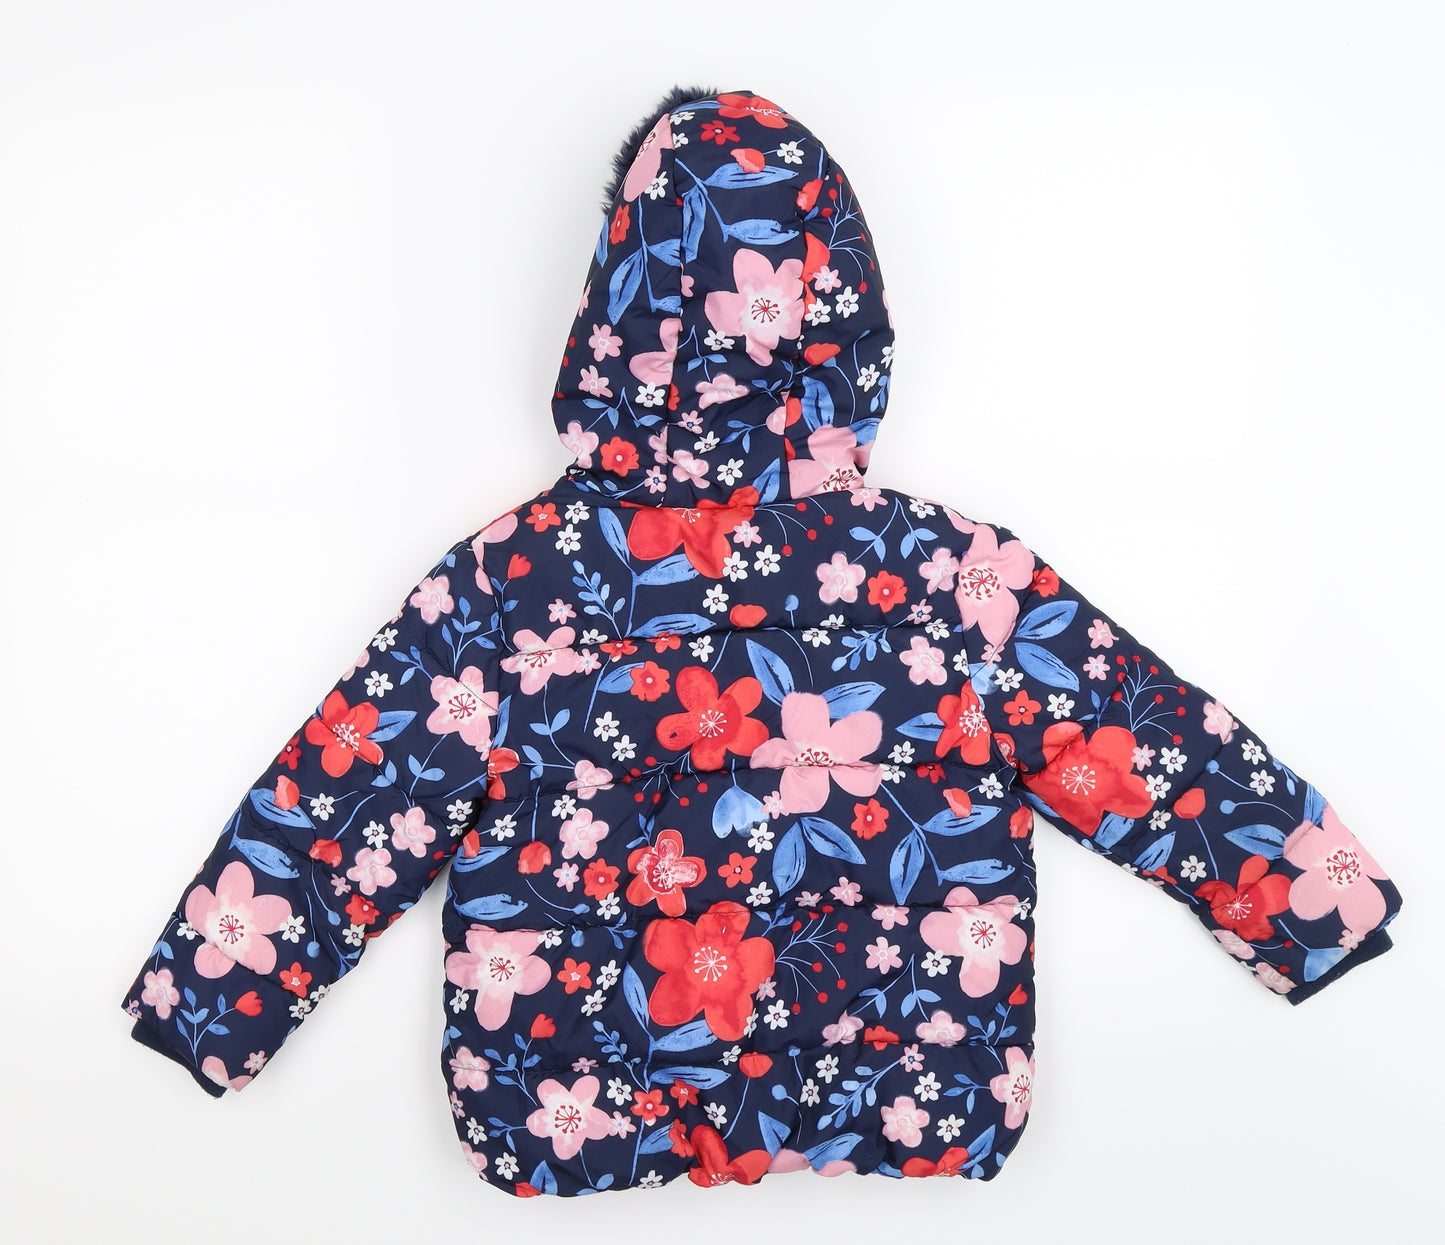 George Girls Blue Floral  Puffer Jacket Coat Size 4-5 Years